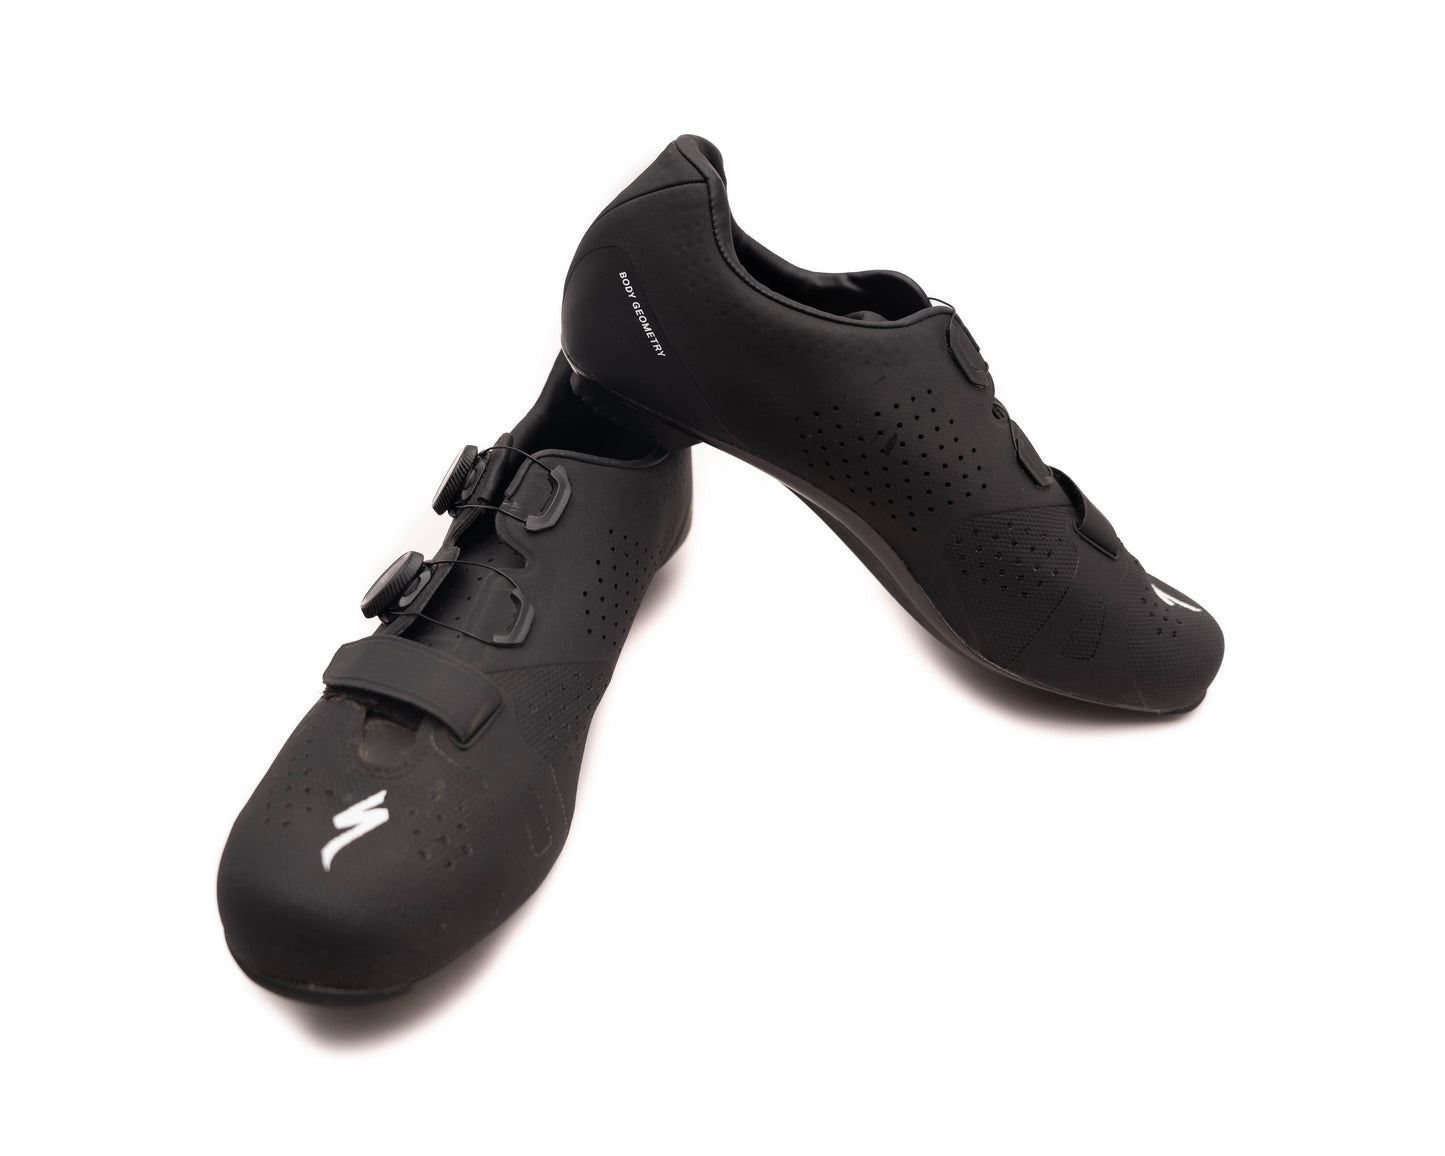 Specialized Torch 3.0 Road Shoe Blk 45 (USED)